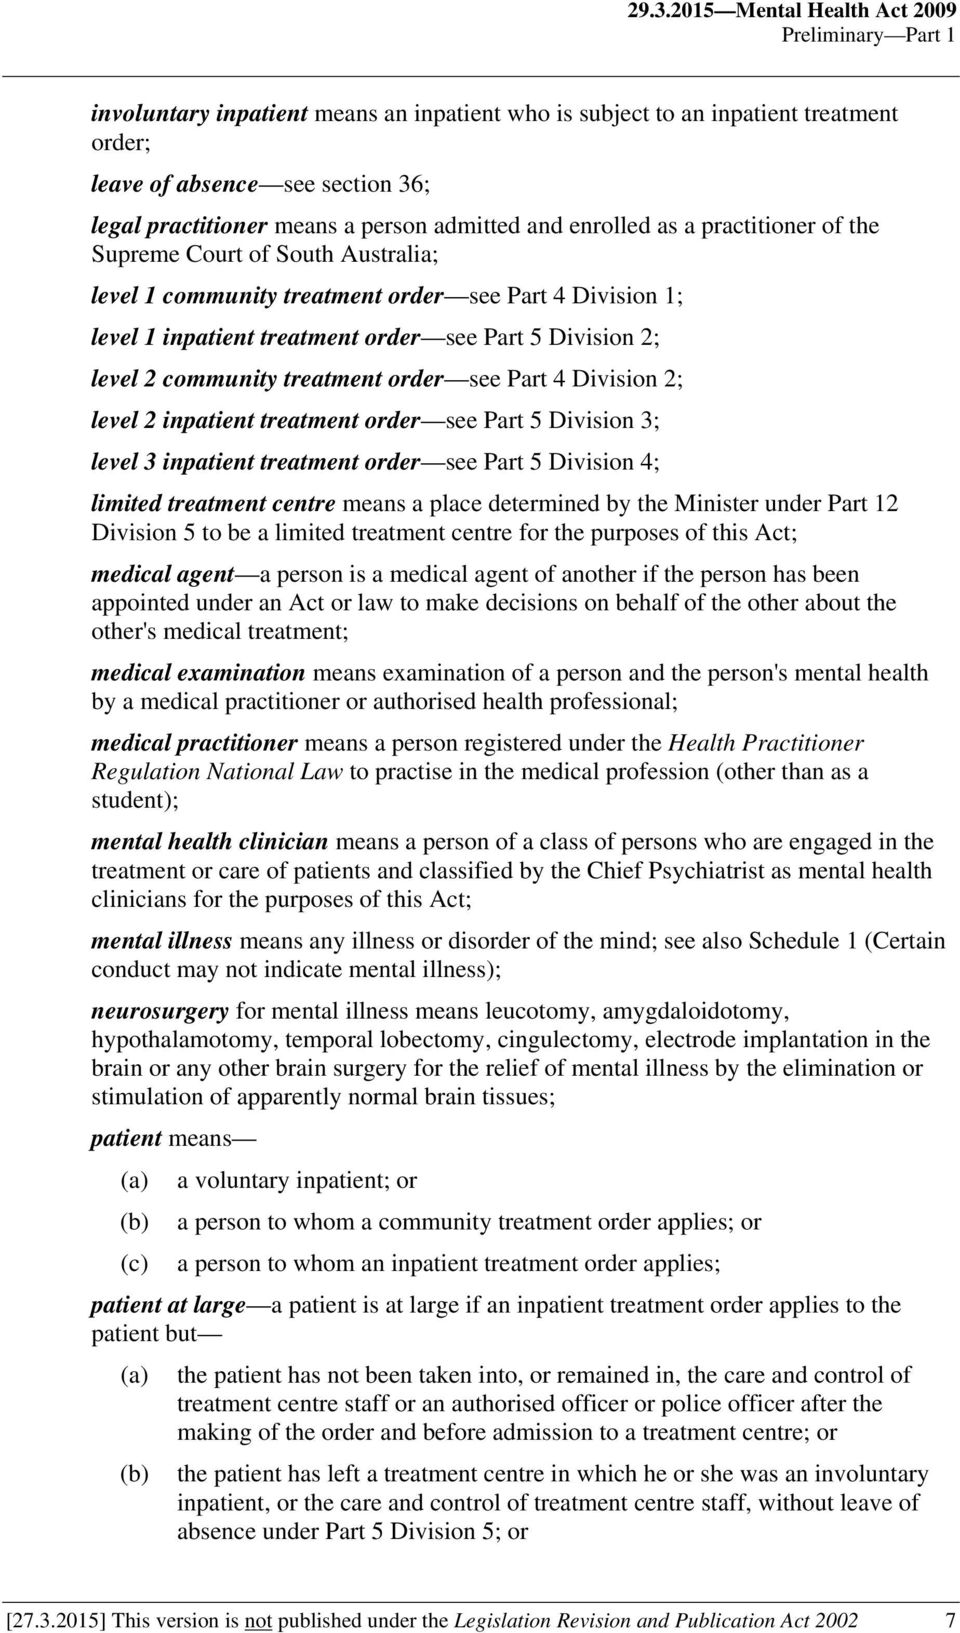 Division 2; level 2 community treatment order see Part 4 Division 2; level 2 inpatient treatment order see Part 5 Division 3; level 3 inpatient treatment order see Part 5 Division 4; limited